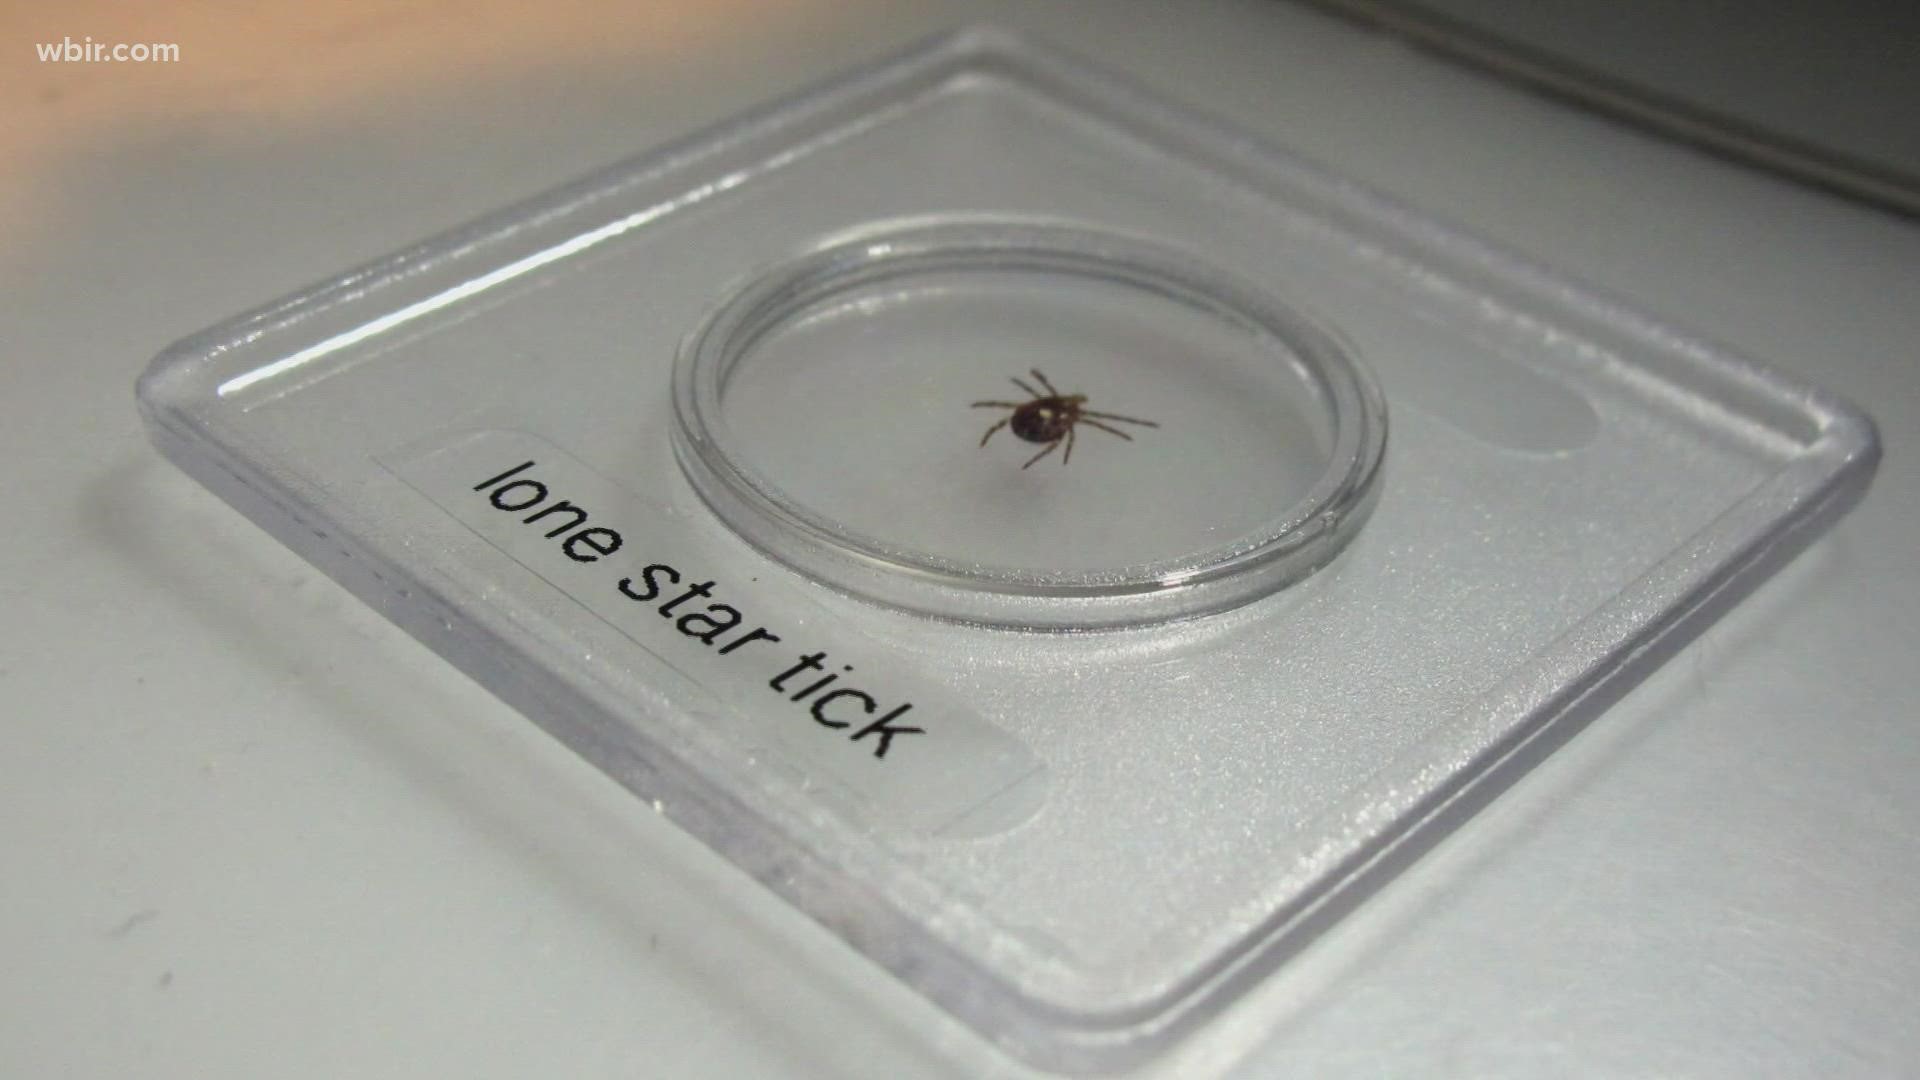 A single tick bite can result in Alpha-gal Syndrome, which is effectively an allery to meat.